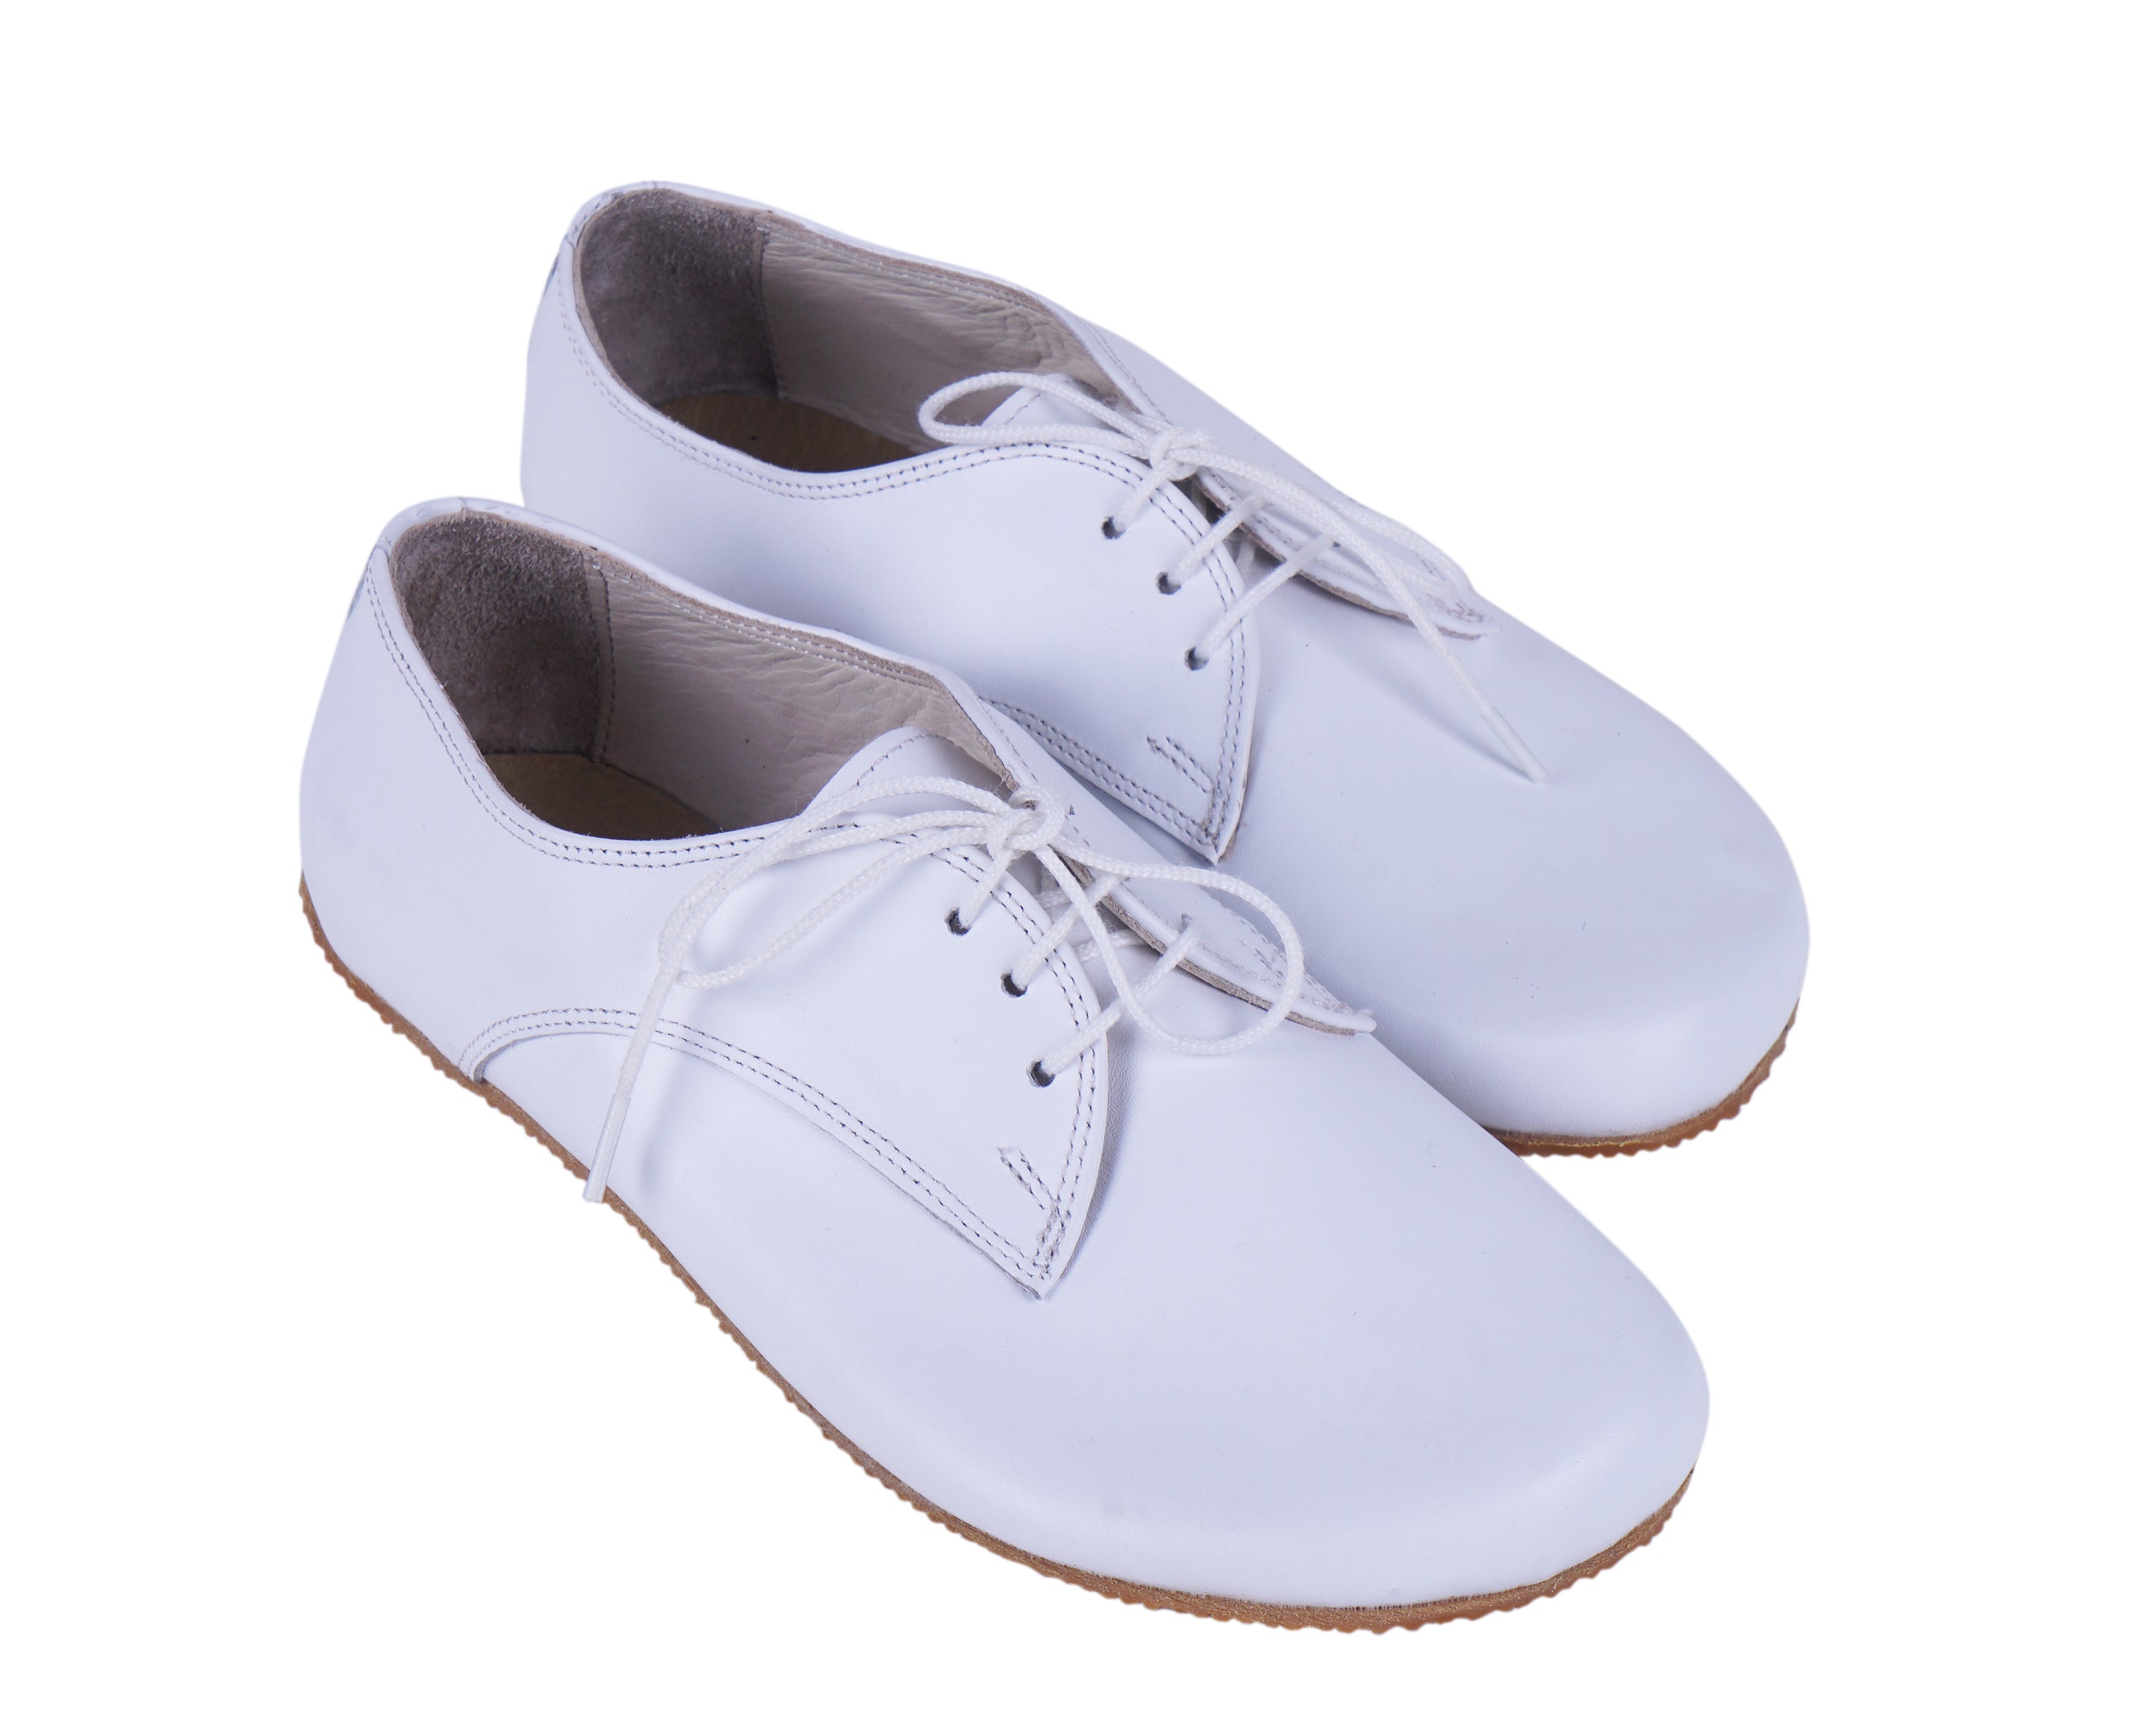 White Oxford Wide Barefoot Shoes Smooth Leather Handmade 4mm Rubber Outsole